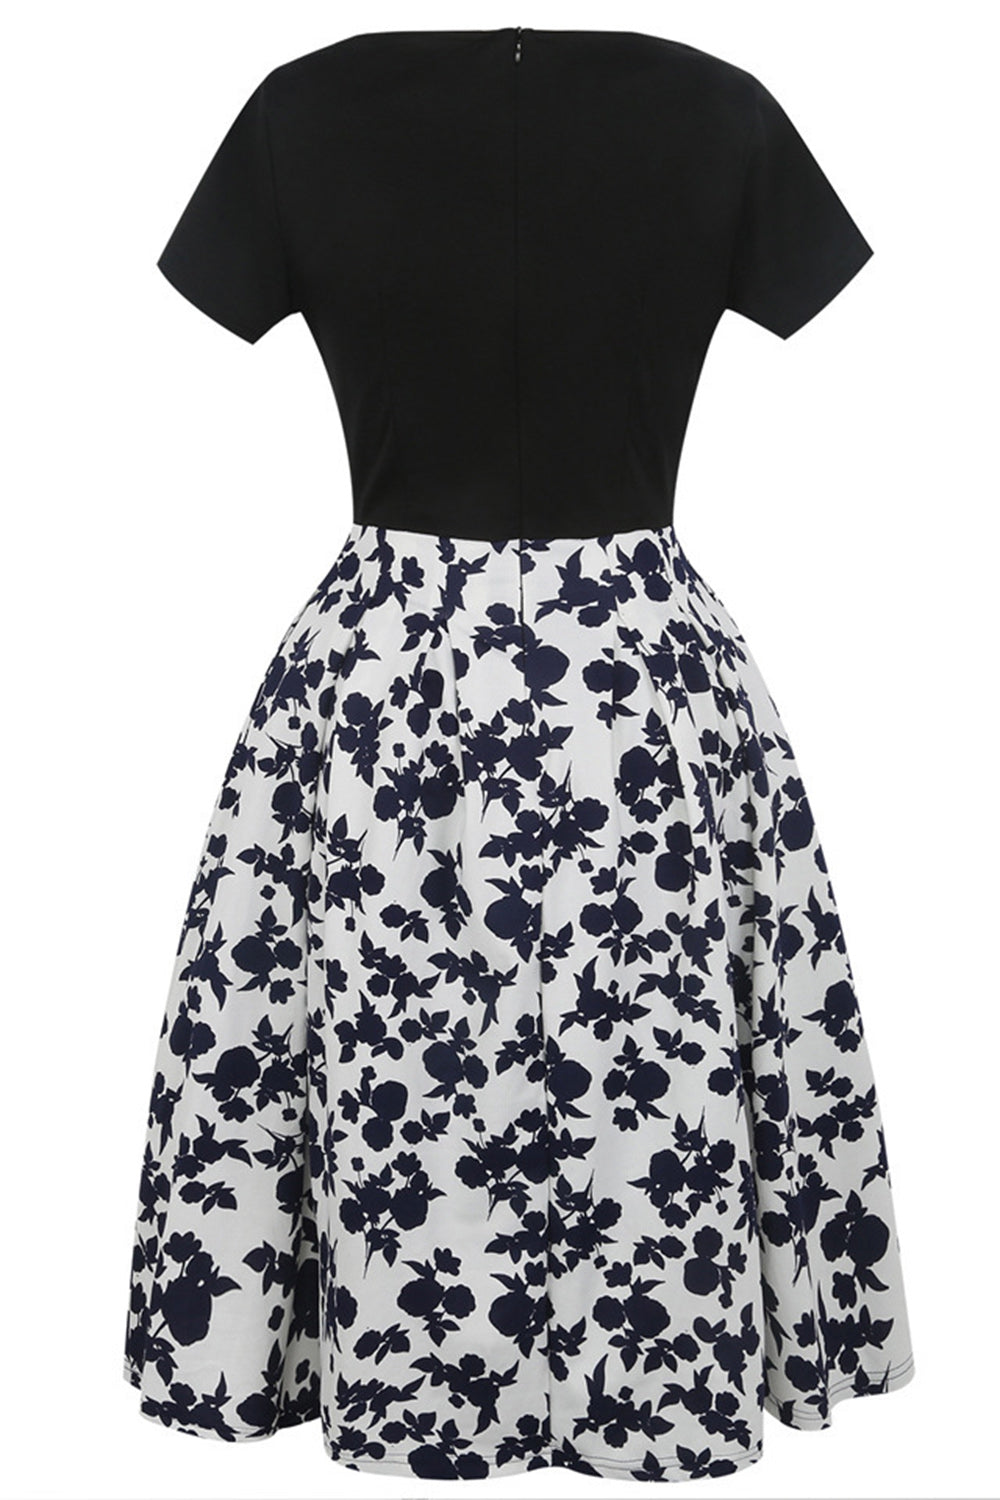 Boat Neck Printed Black 1950s Dress with Short Sleeves